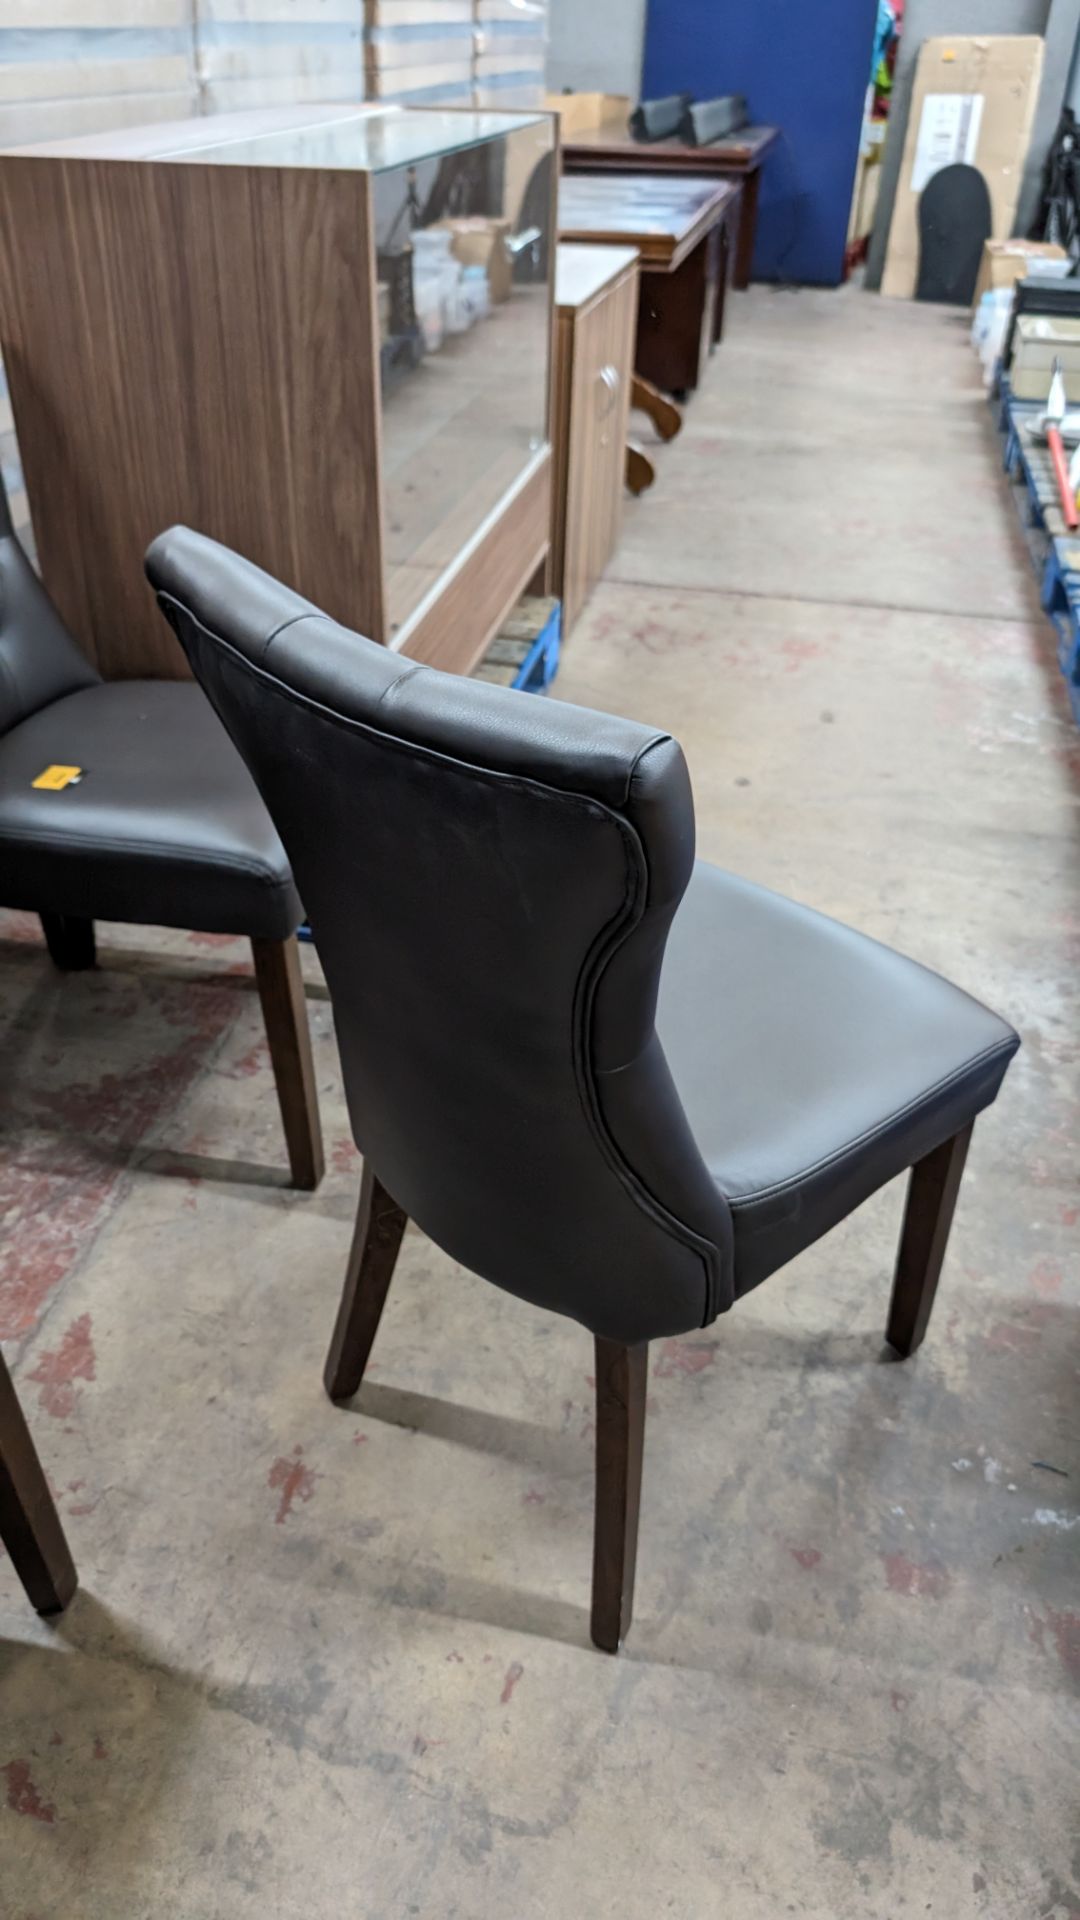 8 off matching pleather dark brown dining chairs - Image 5 of 7